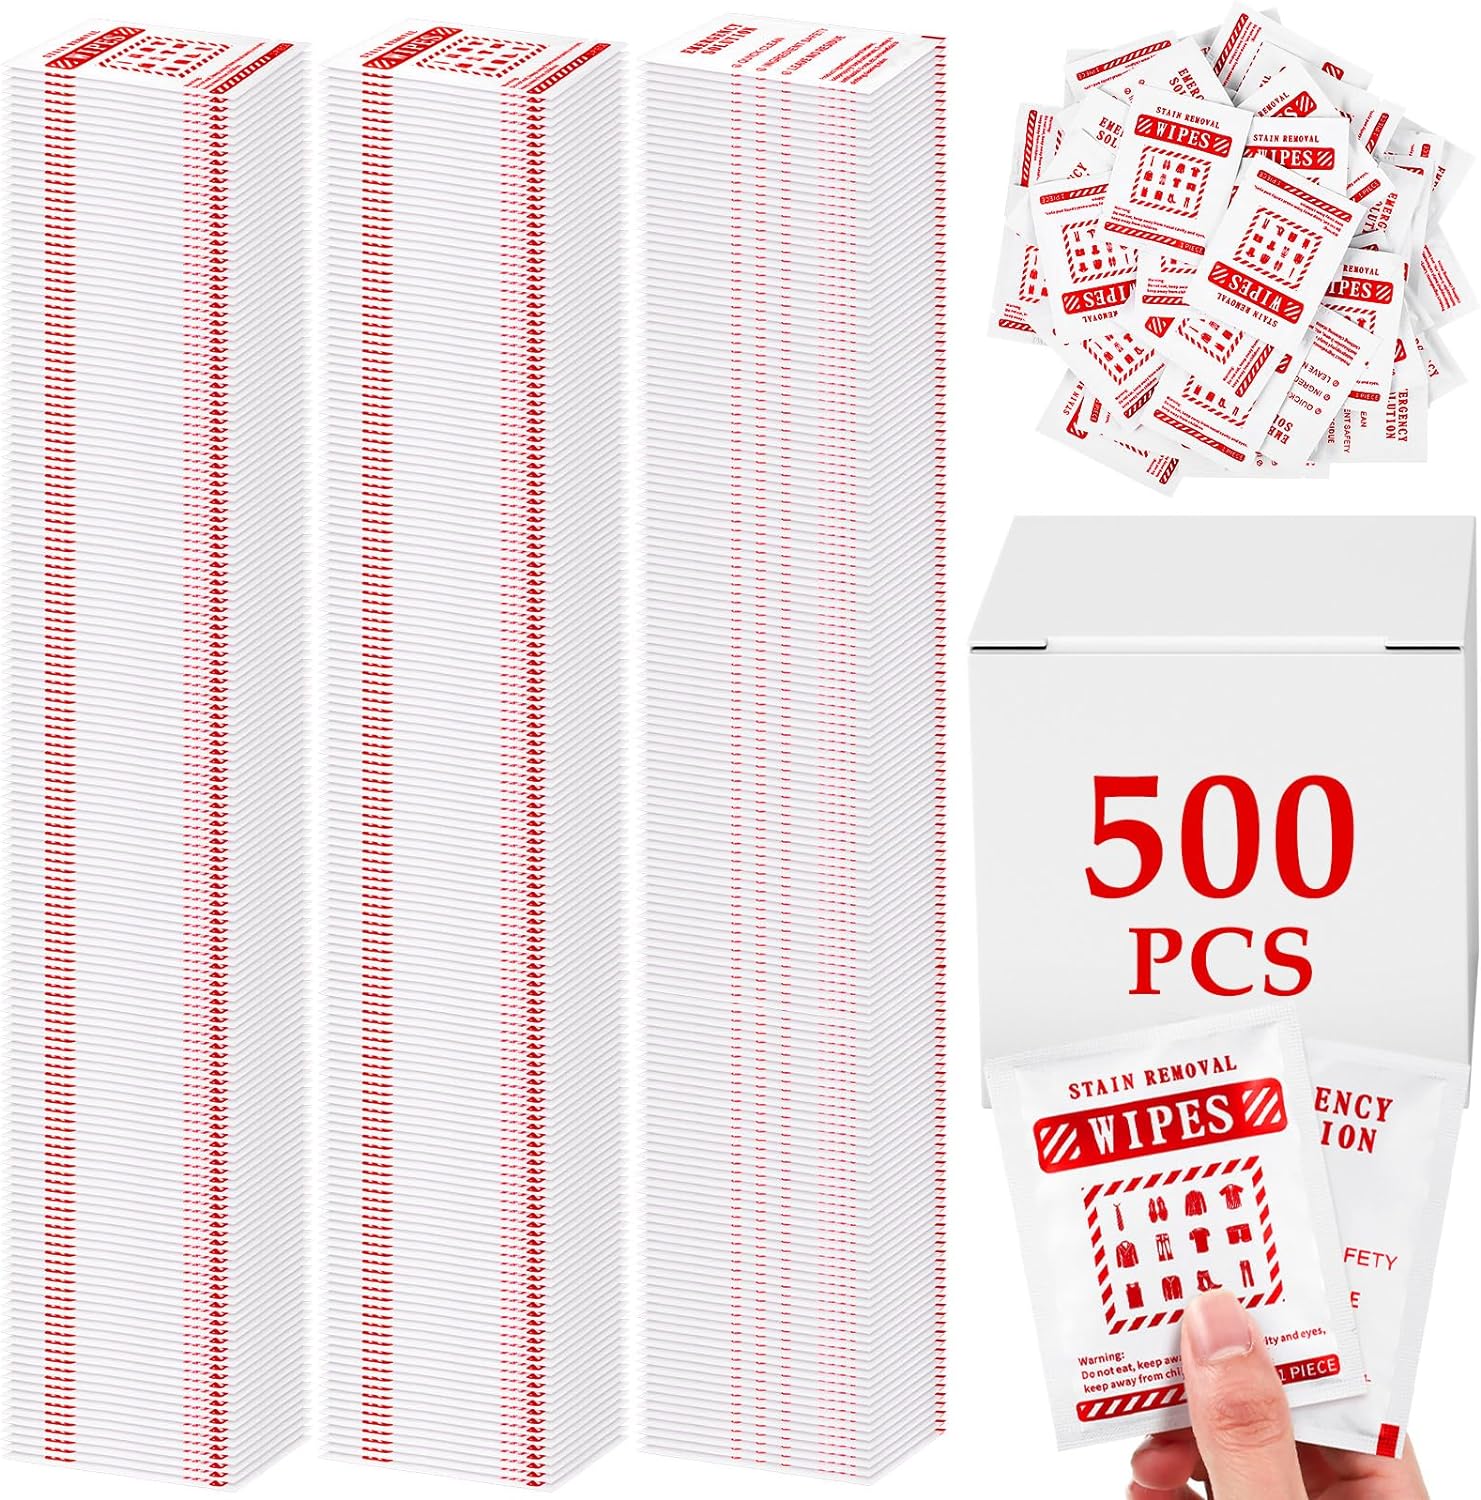 500 Pcs Stain Remover Wipes Individual Wrapped Wipes Stain Remover Mini Stain Remover Wipes for Clothes Fabric Laundry Stain Carpet Baby Messy Eater Car Seat Upholster (White)